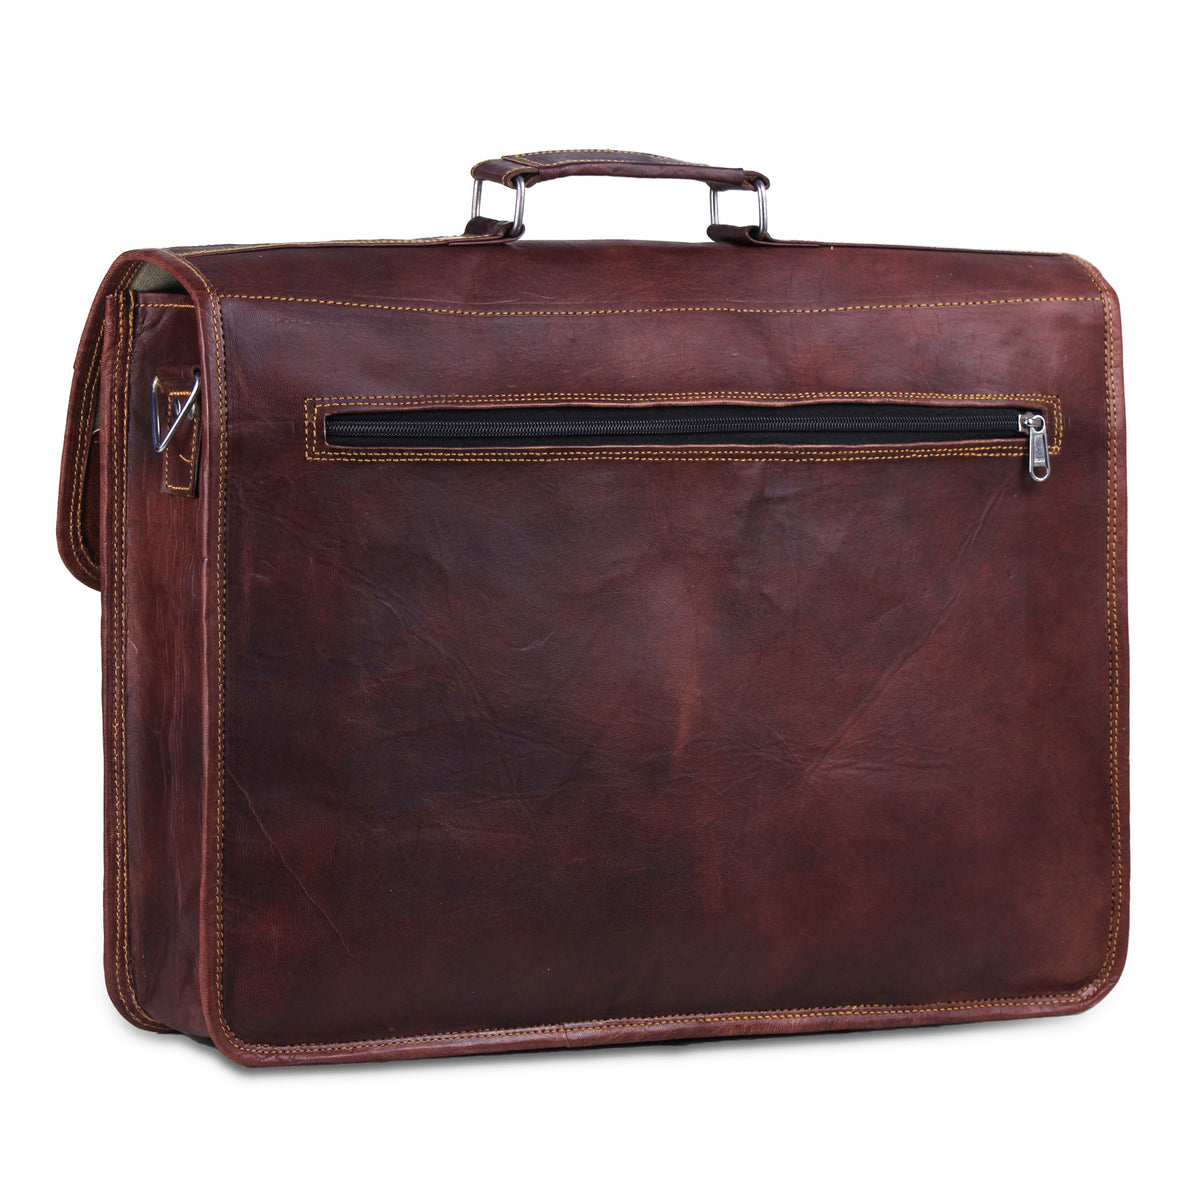 Leather Laptop Bag for Men | Hulsh Leather Bags